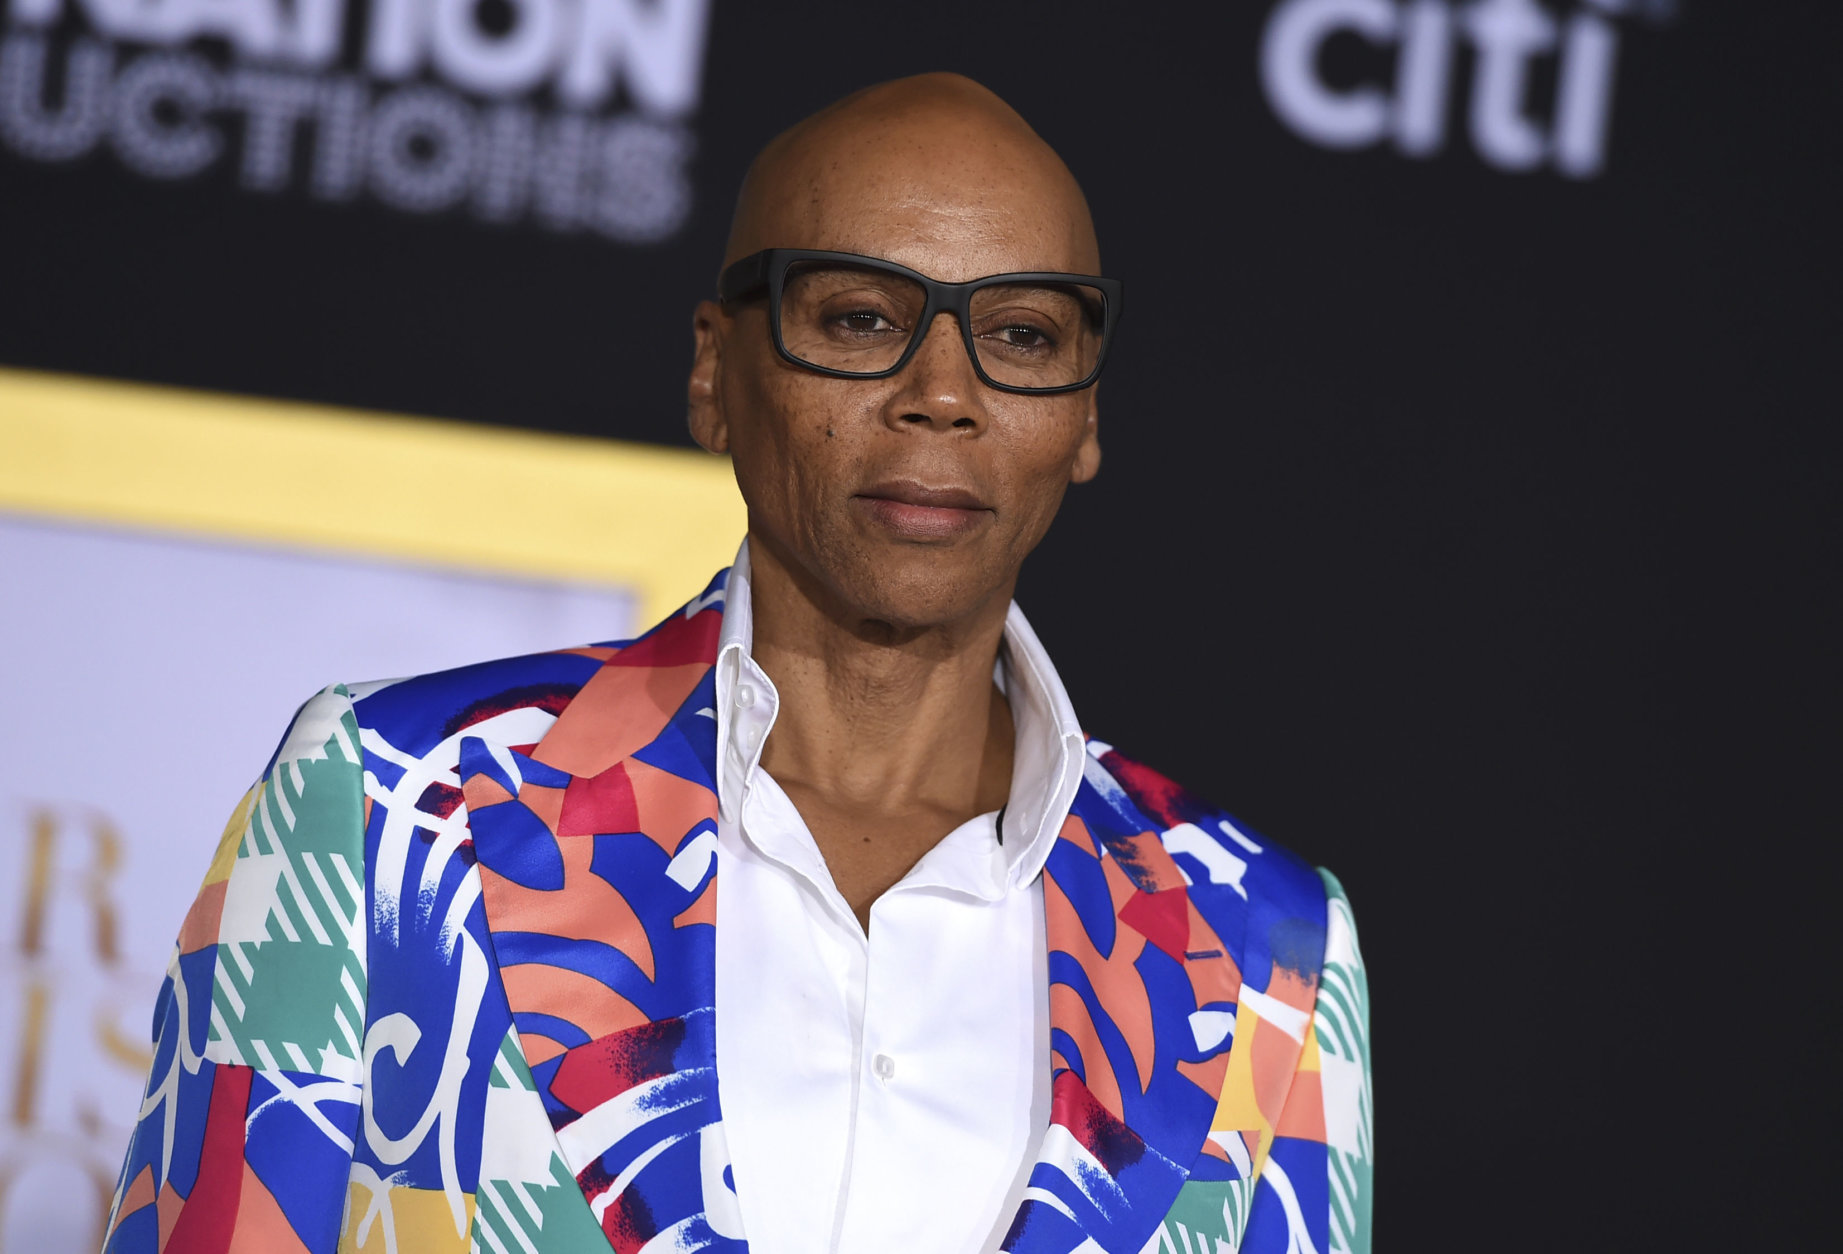 RuPaul Charles arrives at the Los Angeles premiere of "A Star Is Born" on Monday, Sept. 24, 2018, at the Shrine Auditorium. (Photo by Jordan Strauss/Invision/AP)